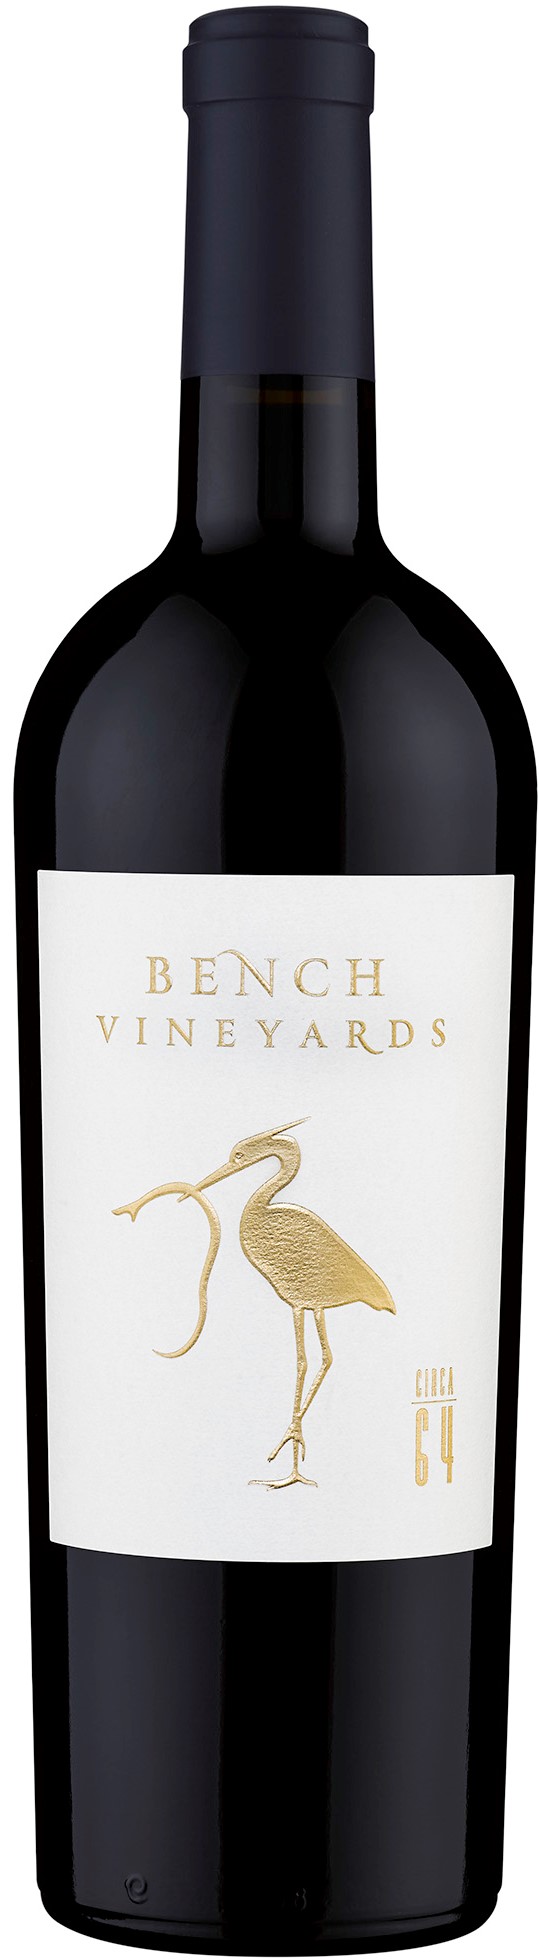 Product Image for 2015 Bench Vineyards "Circa 64" Red Wine, SLD